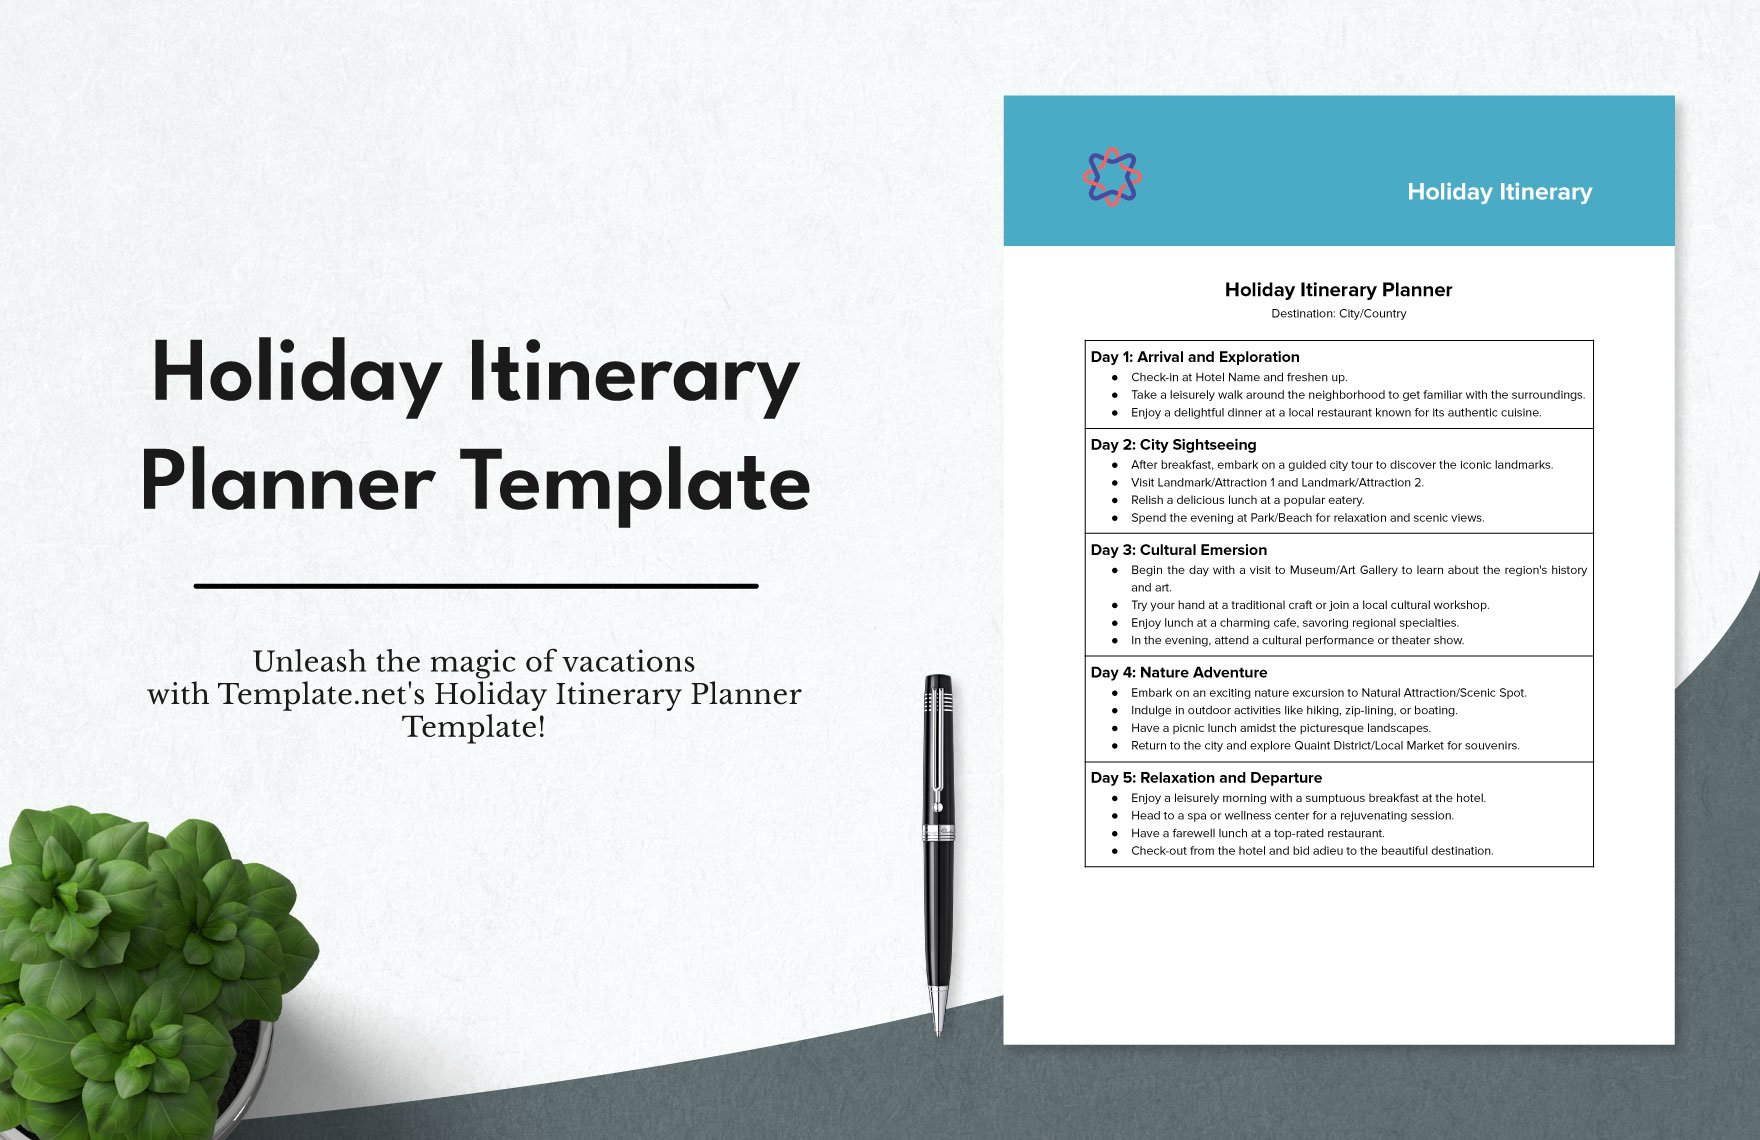 Holiday Itinerary Planner Template